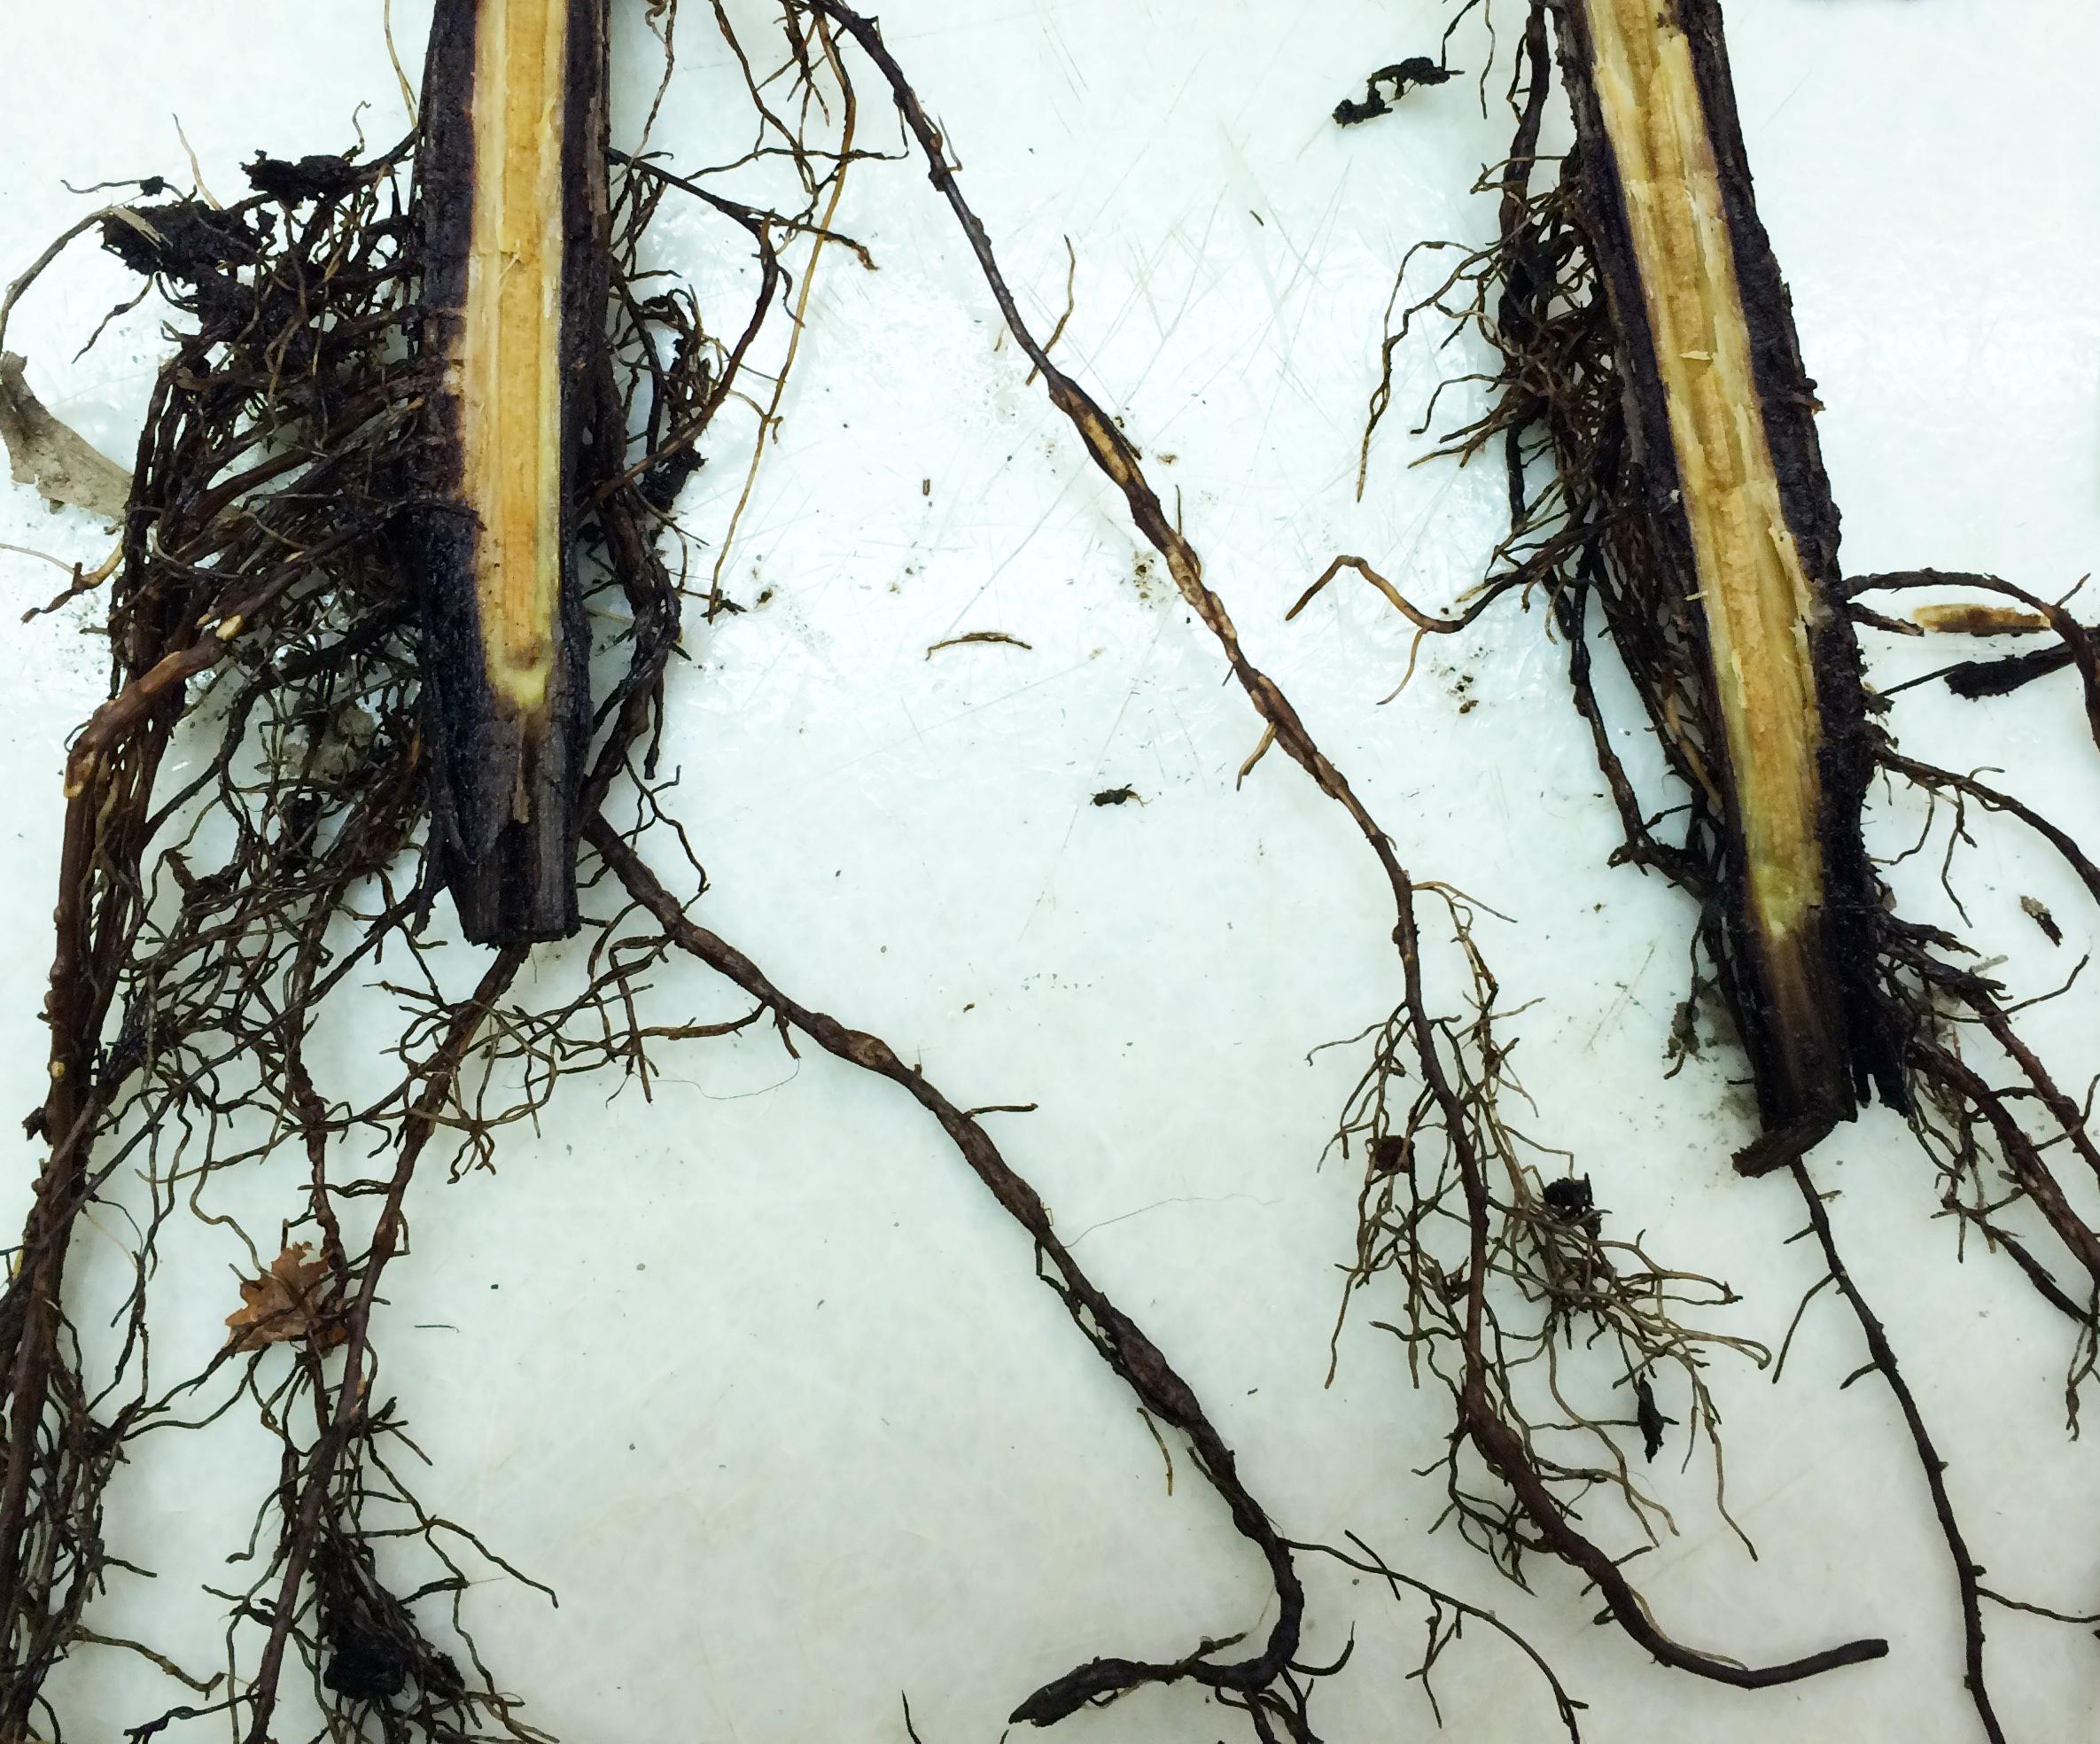 Phytophthora crown and root rot (Photo: Dean Volenberg, University of Missouri)